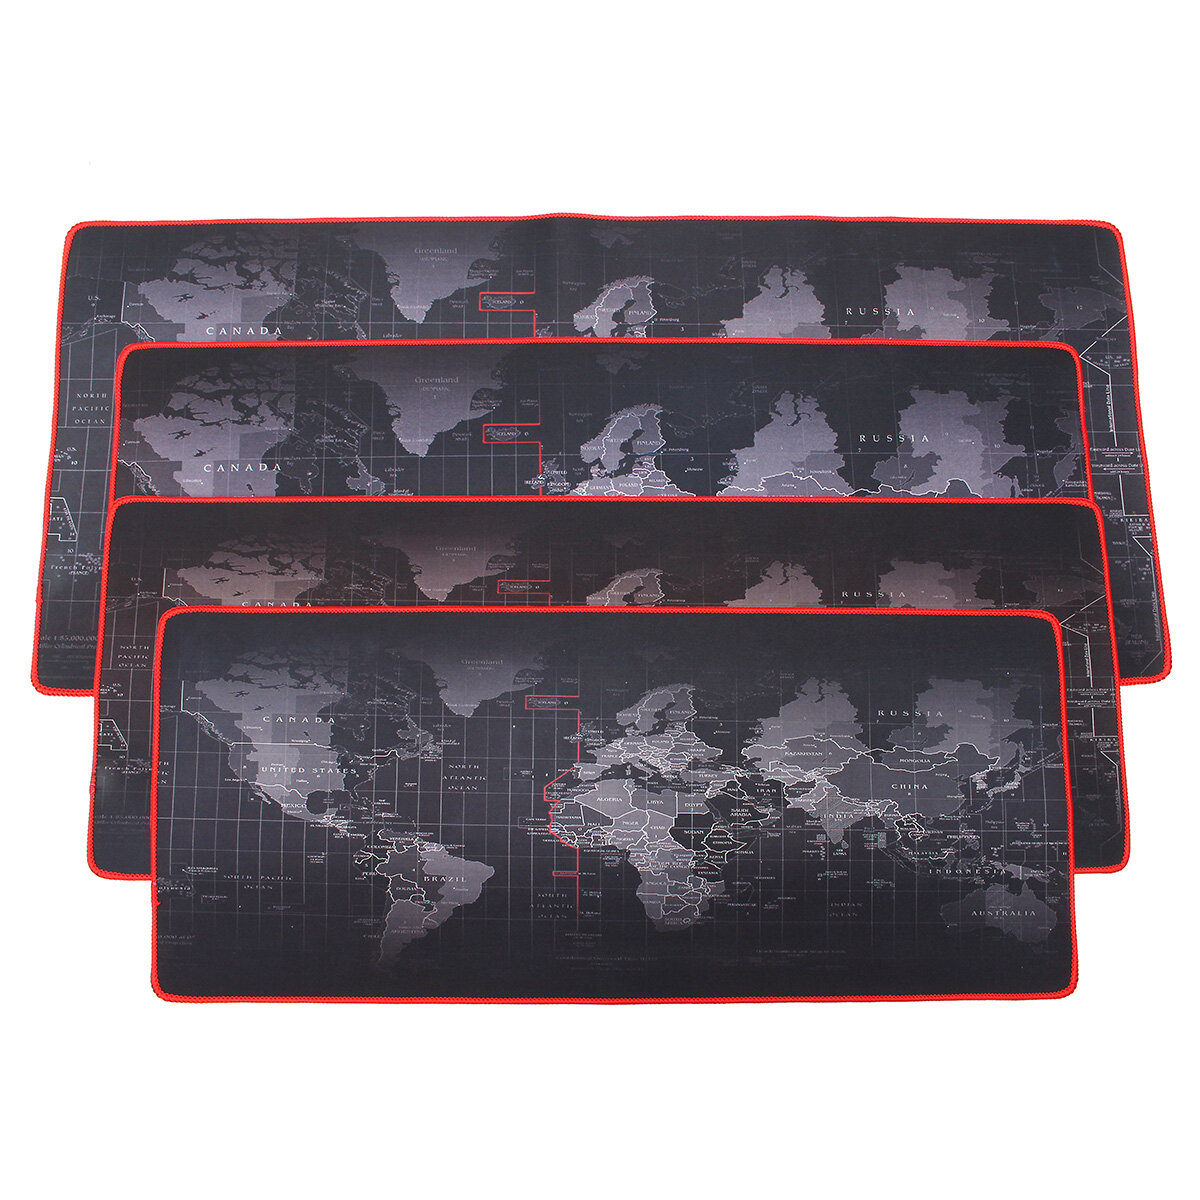 2mm Large Non Slip World Map Game Mouse Pad Mat With Red Hem For